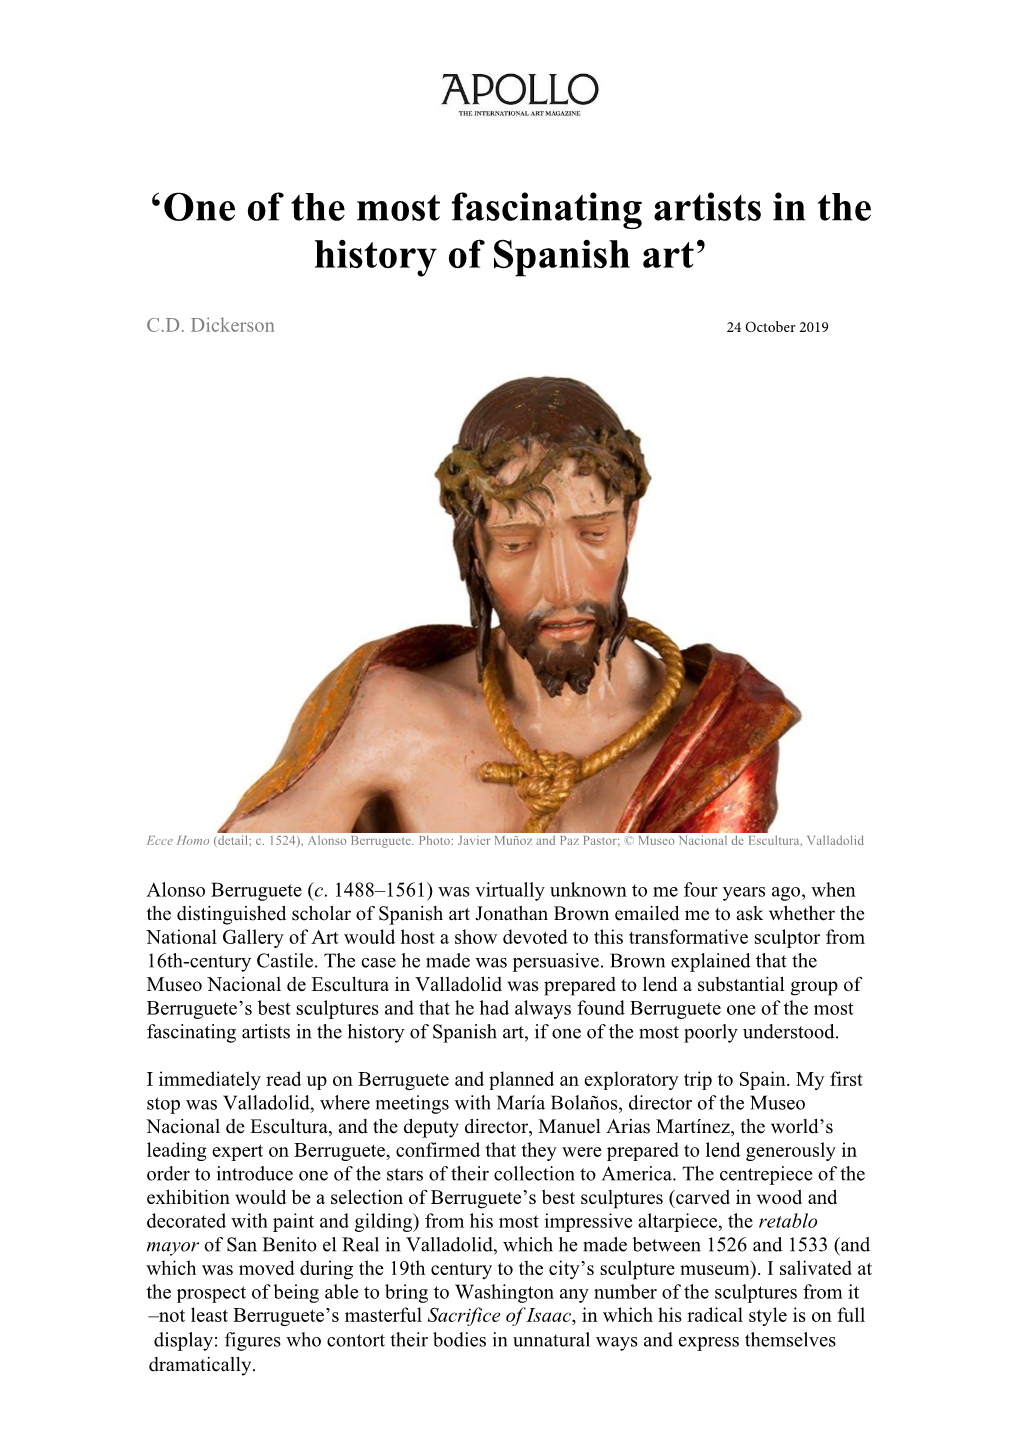 'One of the Most Fascinating Artists in the History of Spanish Art'